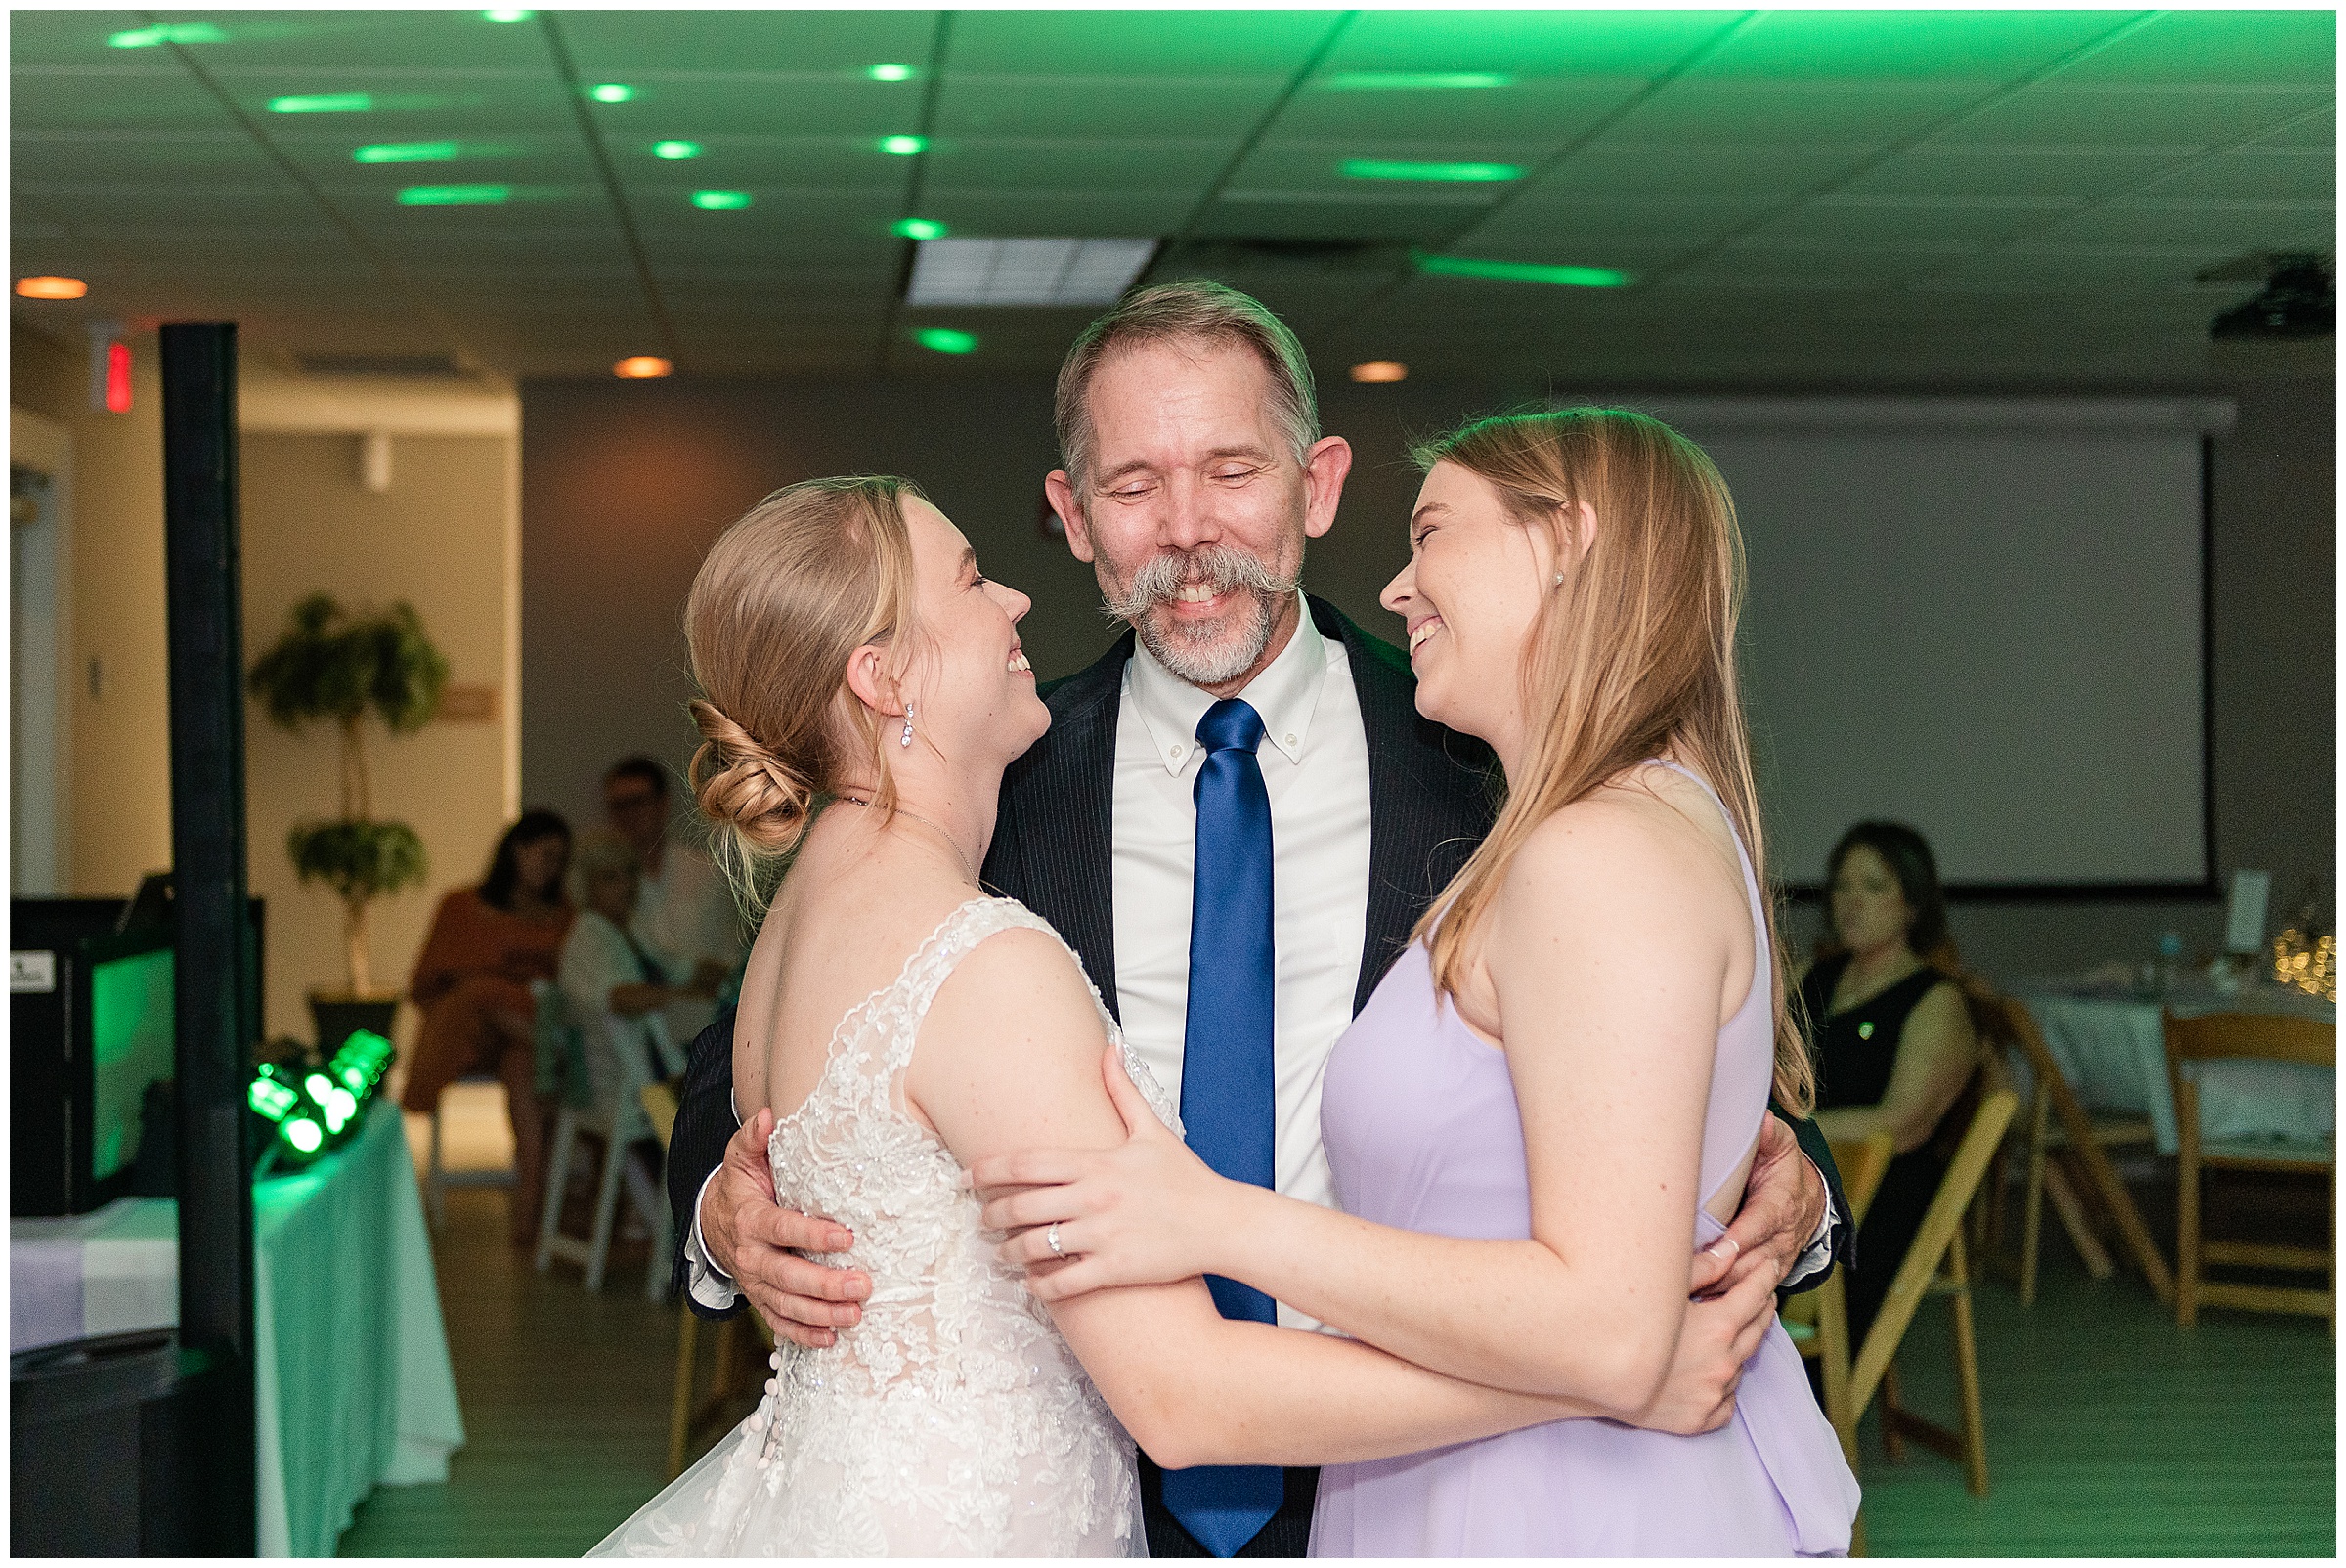 Special dance with father and his two adult daughters during a wedding reception  at Tampa Bay Watch Wedding in Tierra Verde, FL